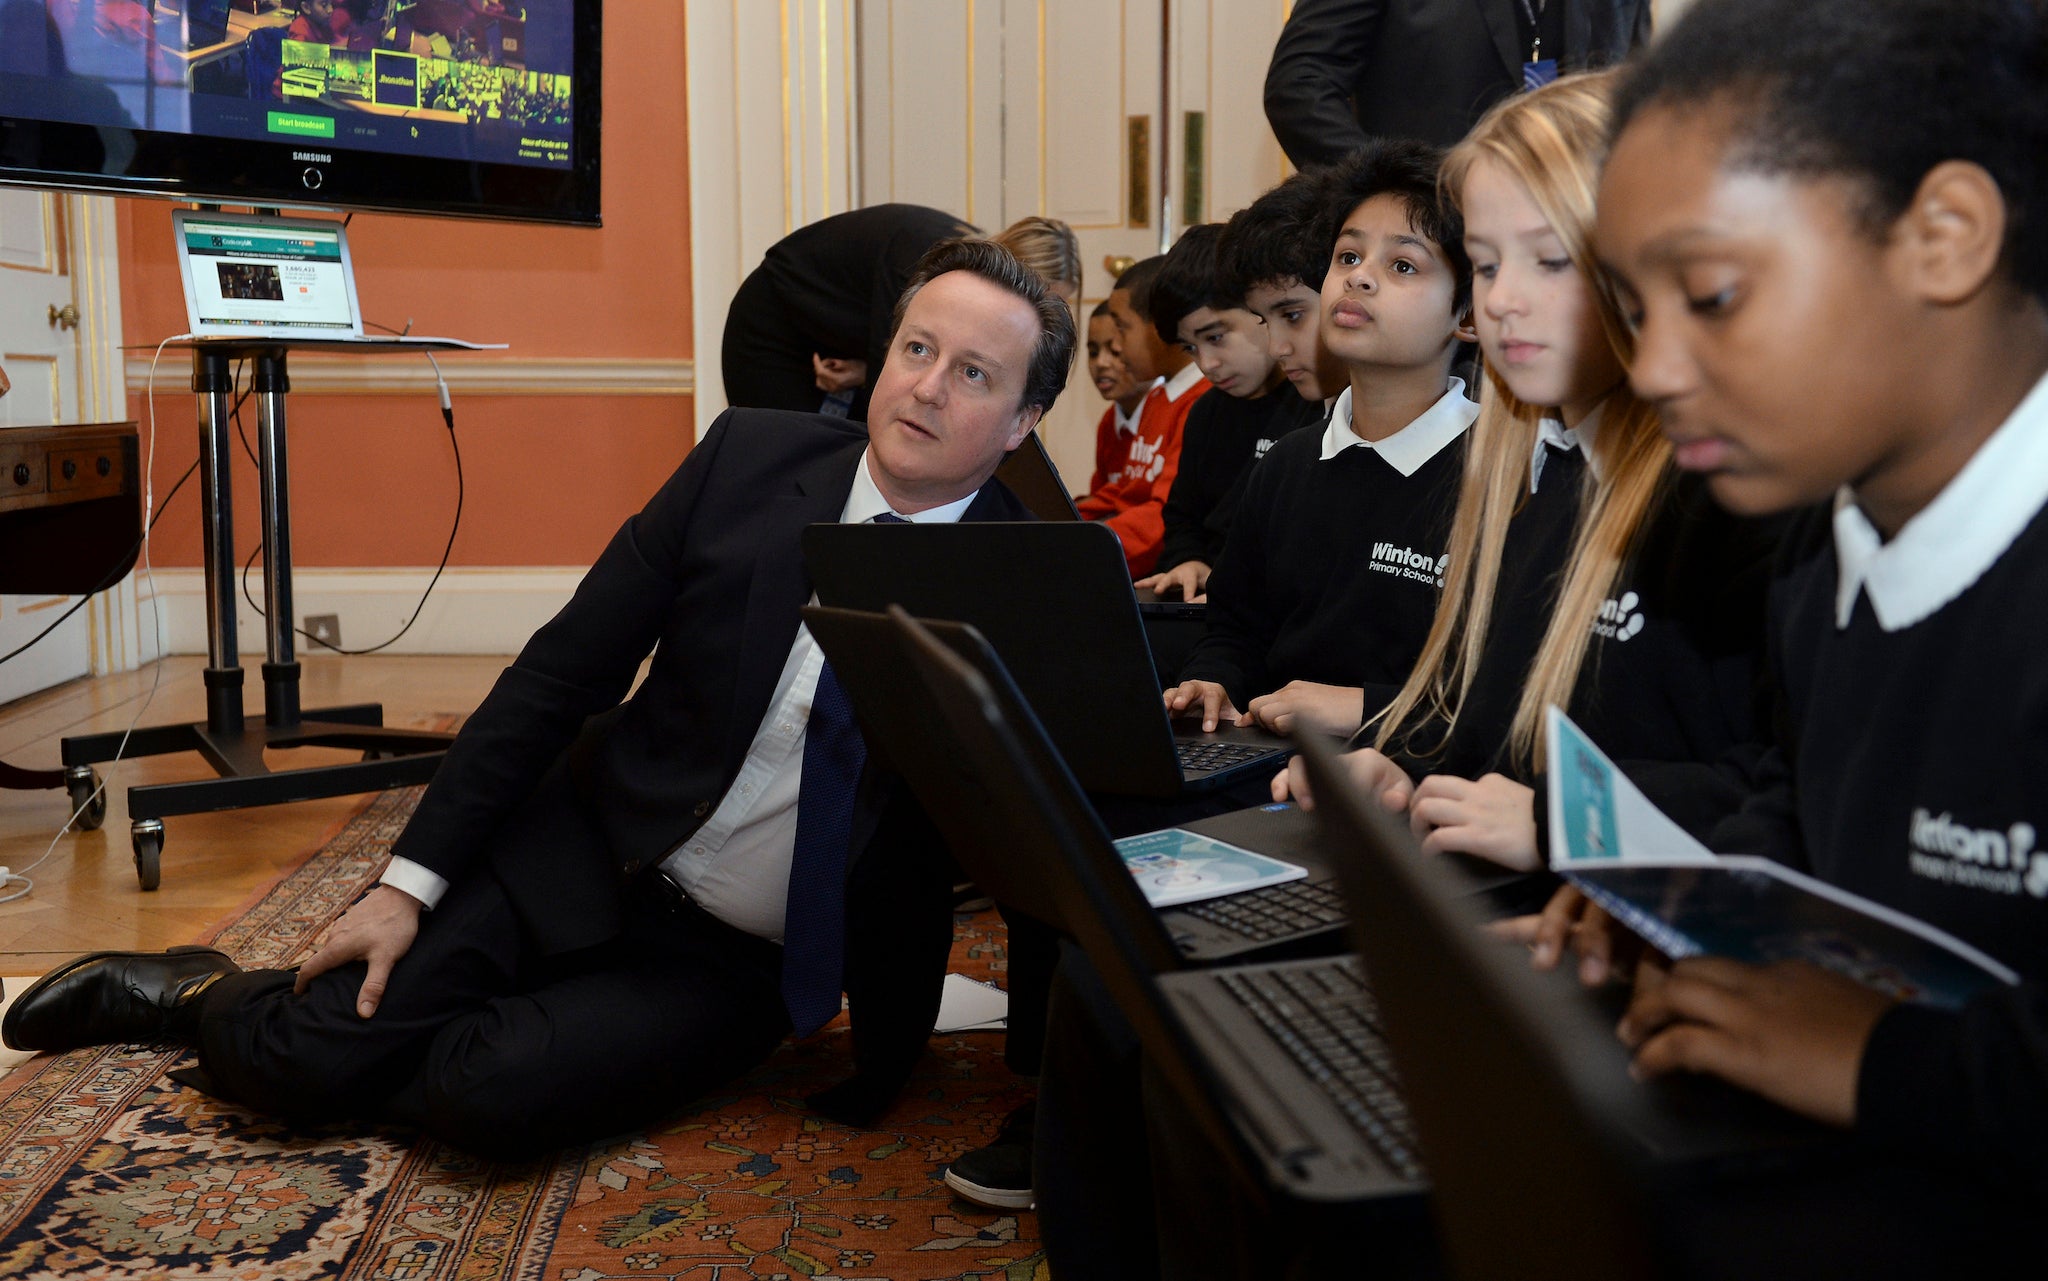 Britain's Prime Minister David Cameron sits on the floor as he joins students for "An Hour of Coding" at Number 10 Downing Street